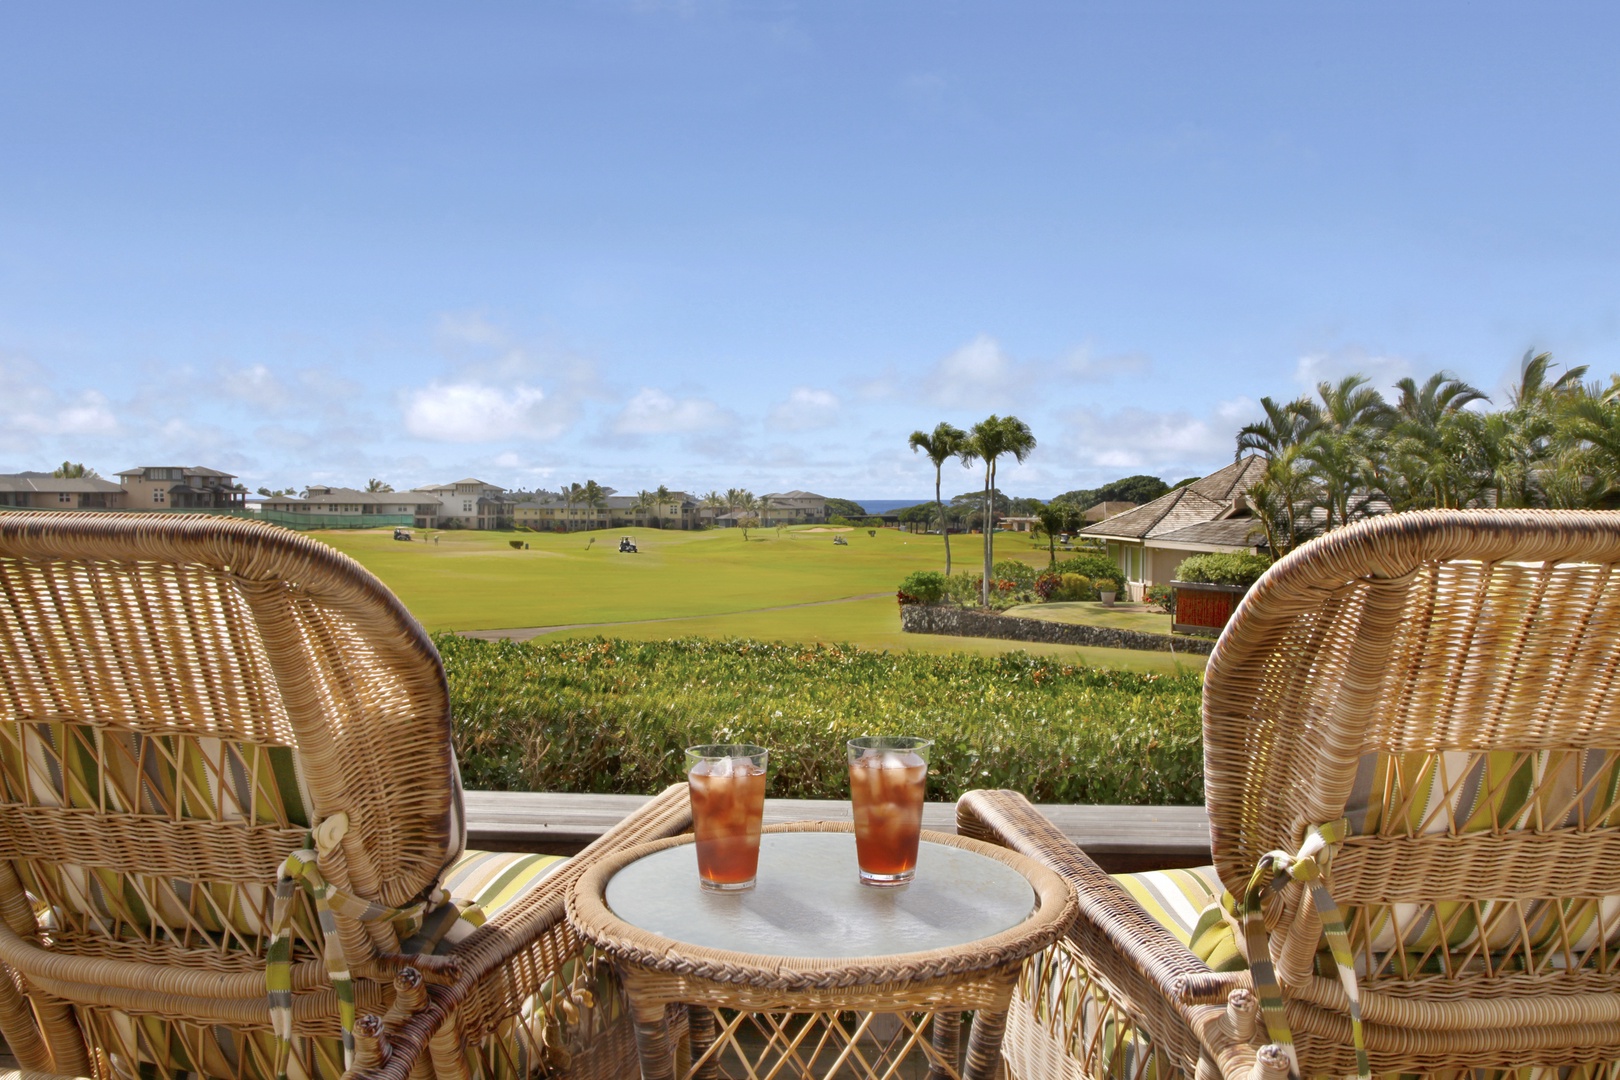 Koloa Vacation Rentals, Plantation Cottage at Poipu - Sunset Lanai with golf course and distant ocean view